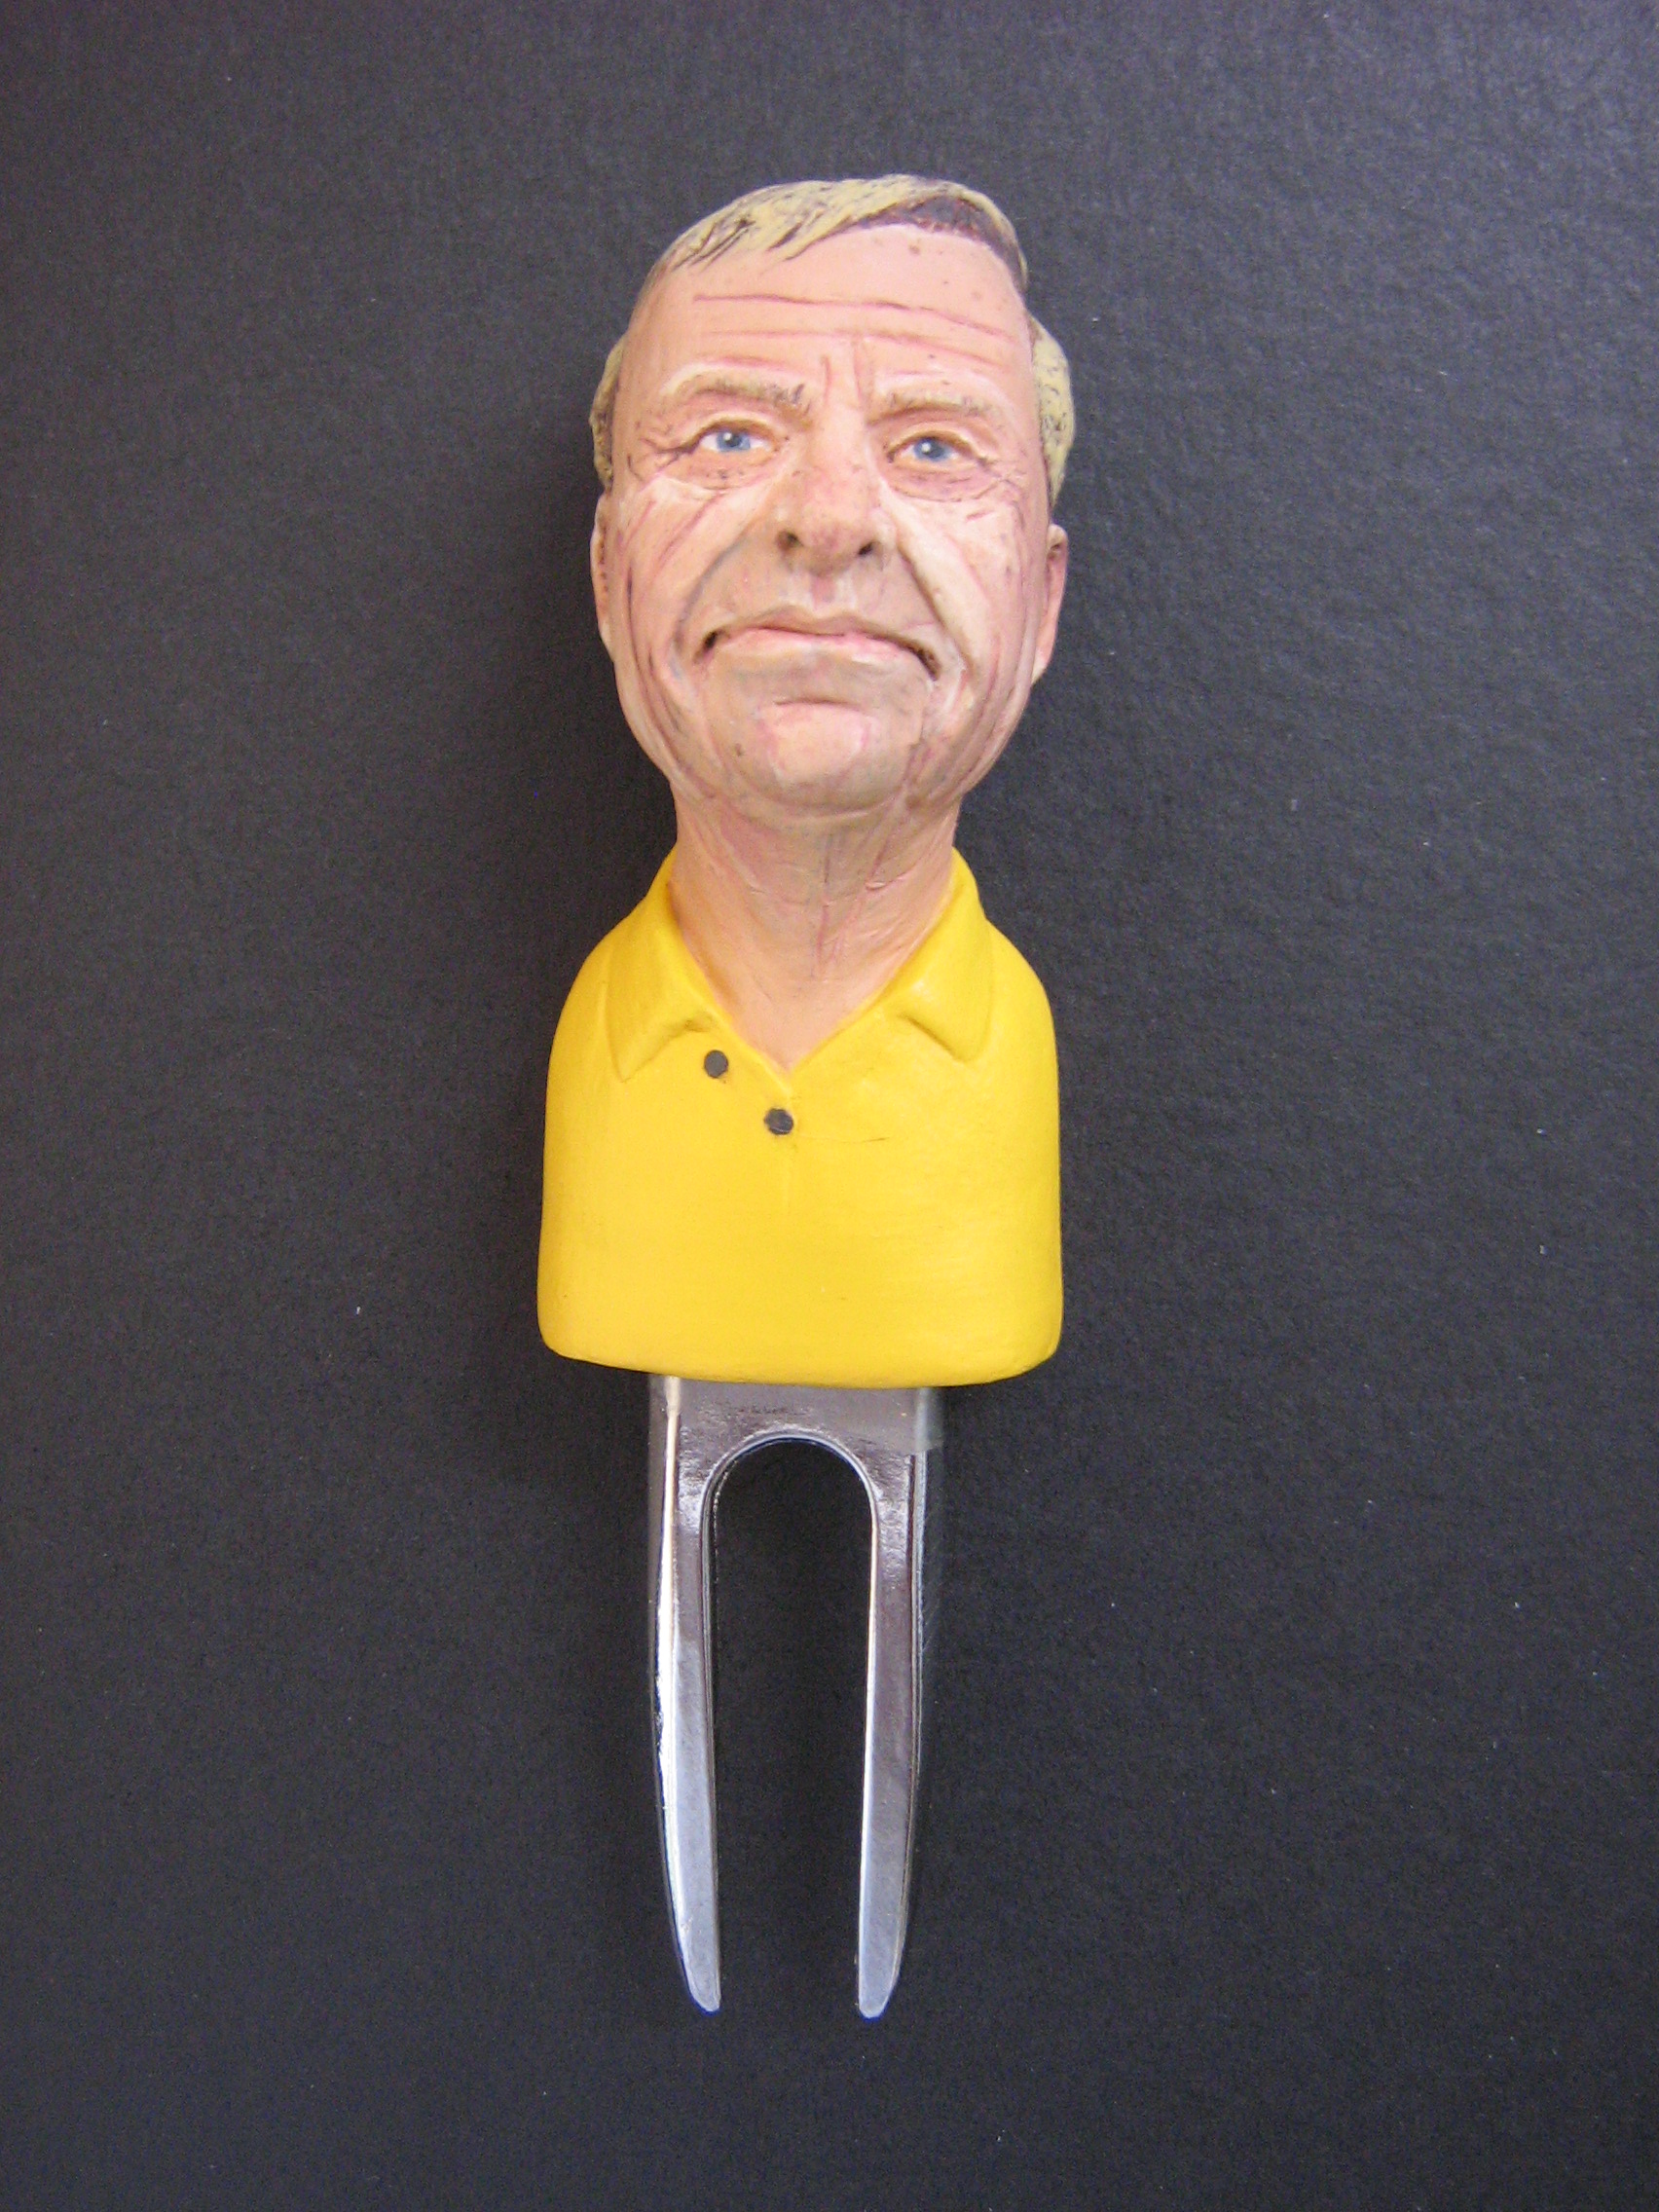 Jack Nicklaus Pitch Mark repairer, Divot Tool, Gopher